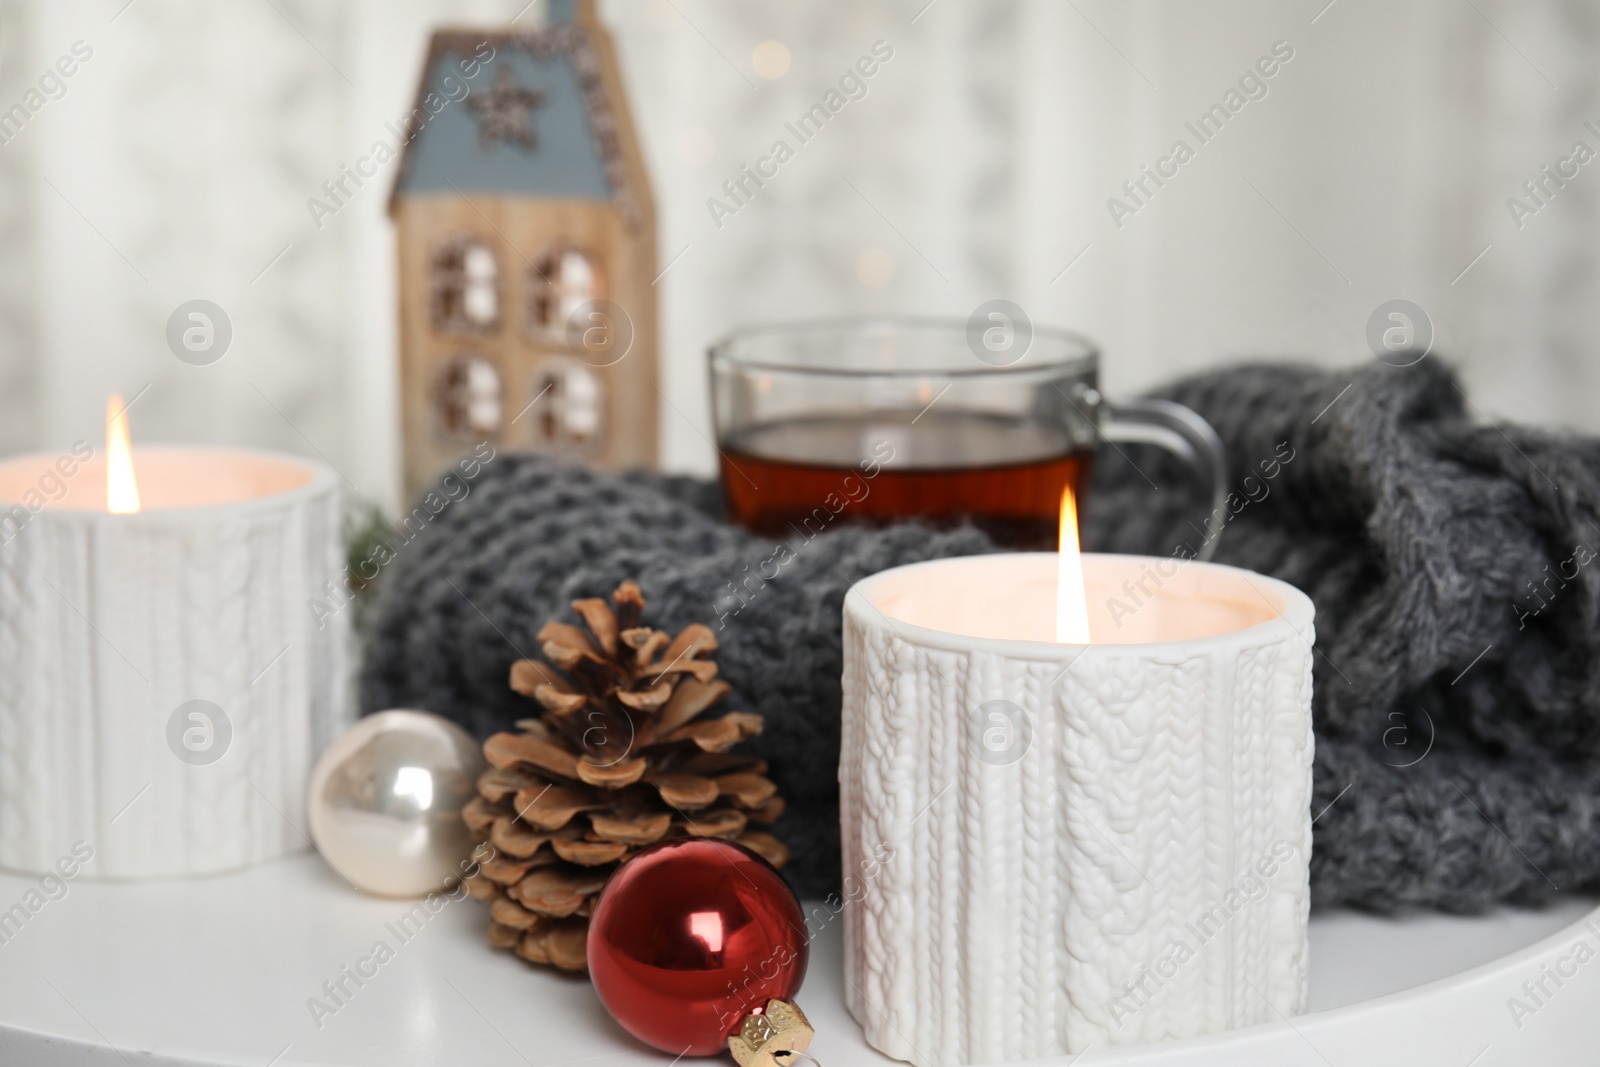 Photo of Composition with candles in ornate holders on table. Christmas decoration